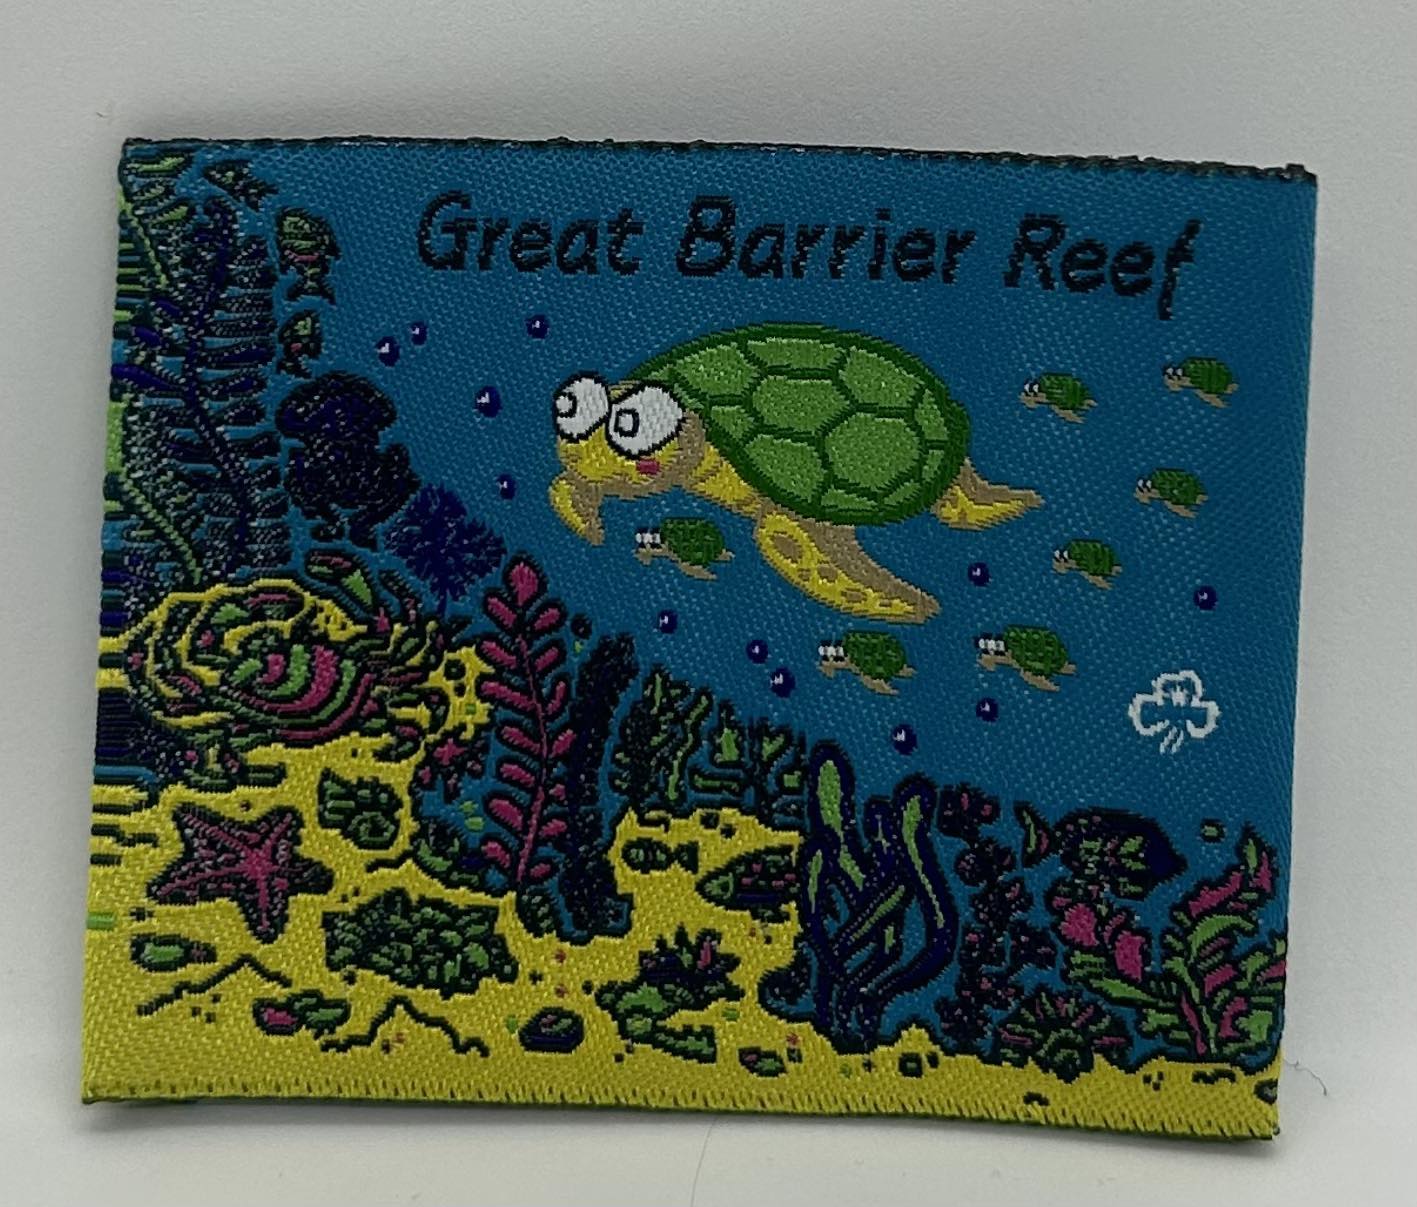 a square unbound badge with a turtle and picture of coral reef